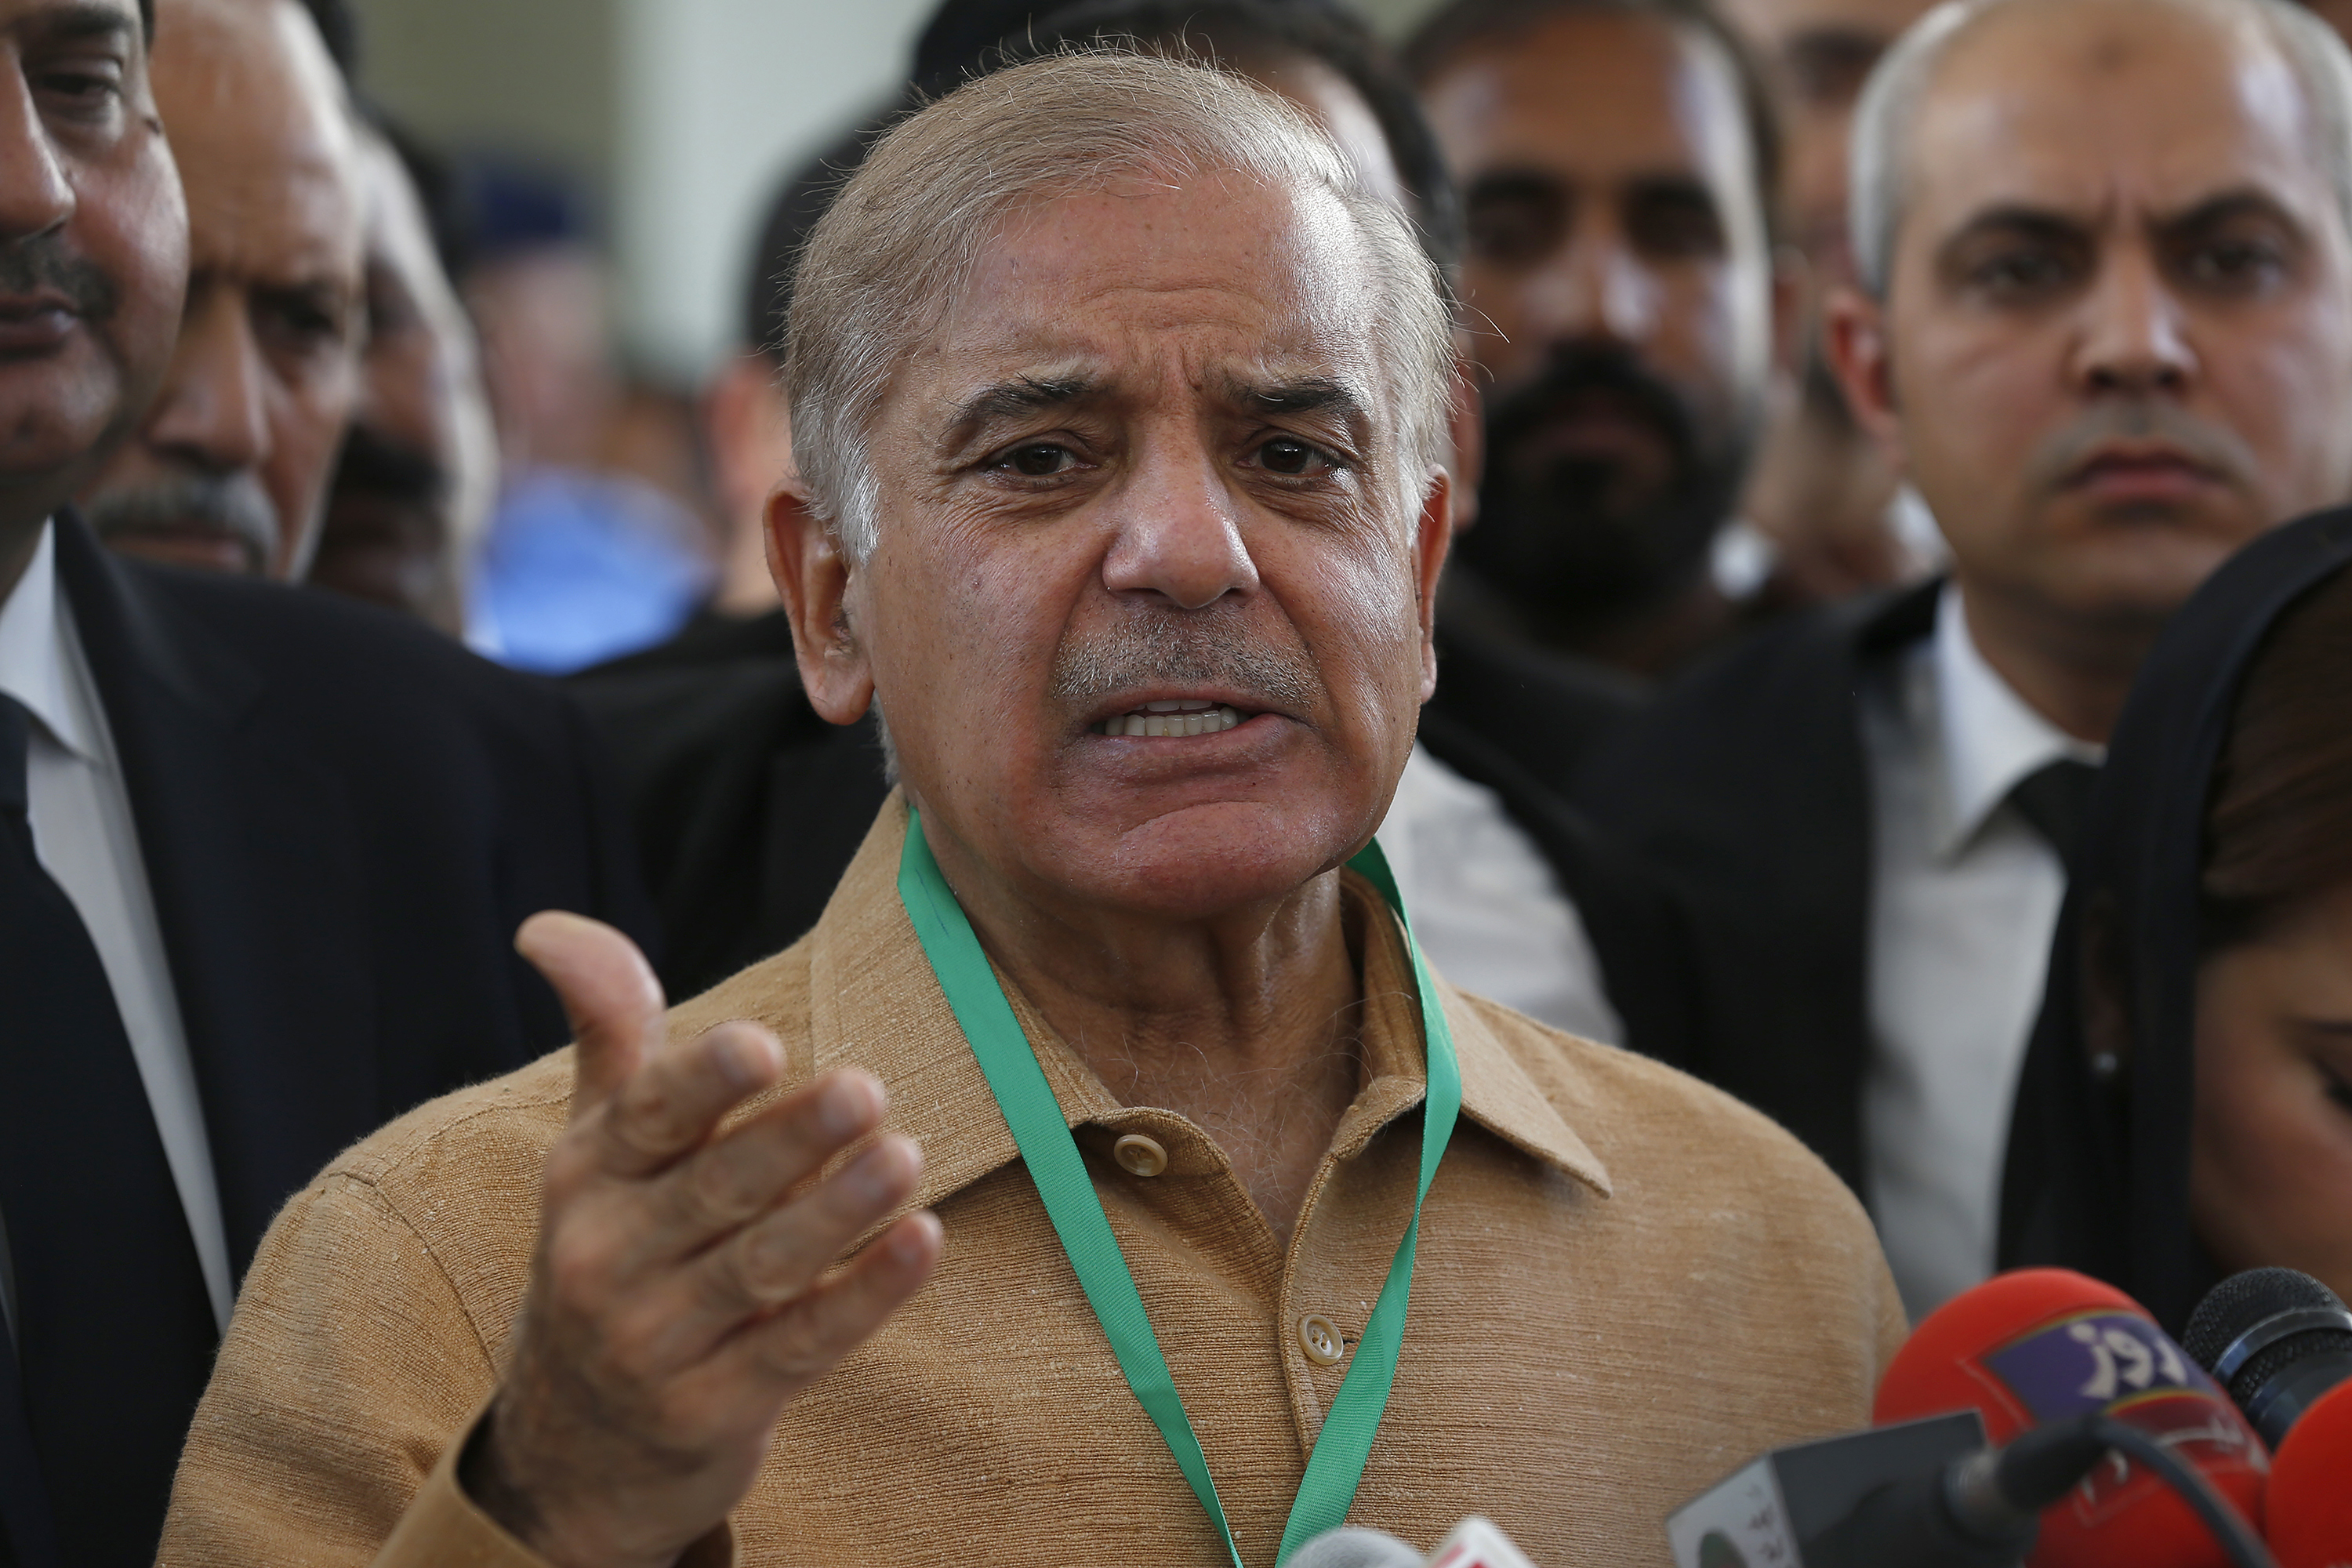 Pakistan's Prime Minister Shehbaz Sharif extends his condolences in a tweet on Wednesday.